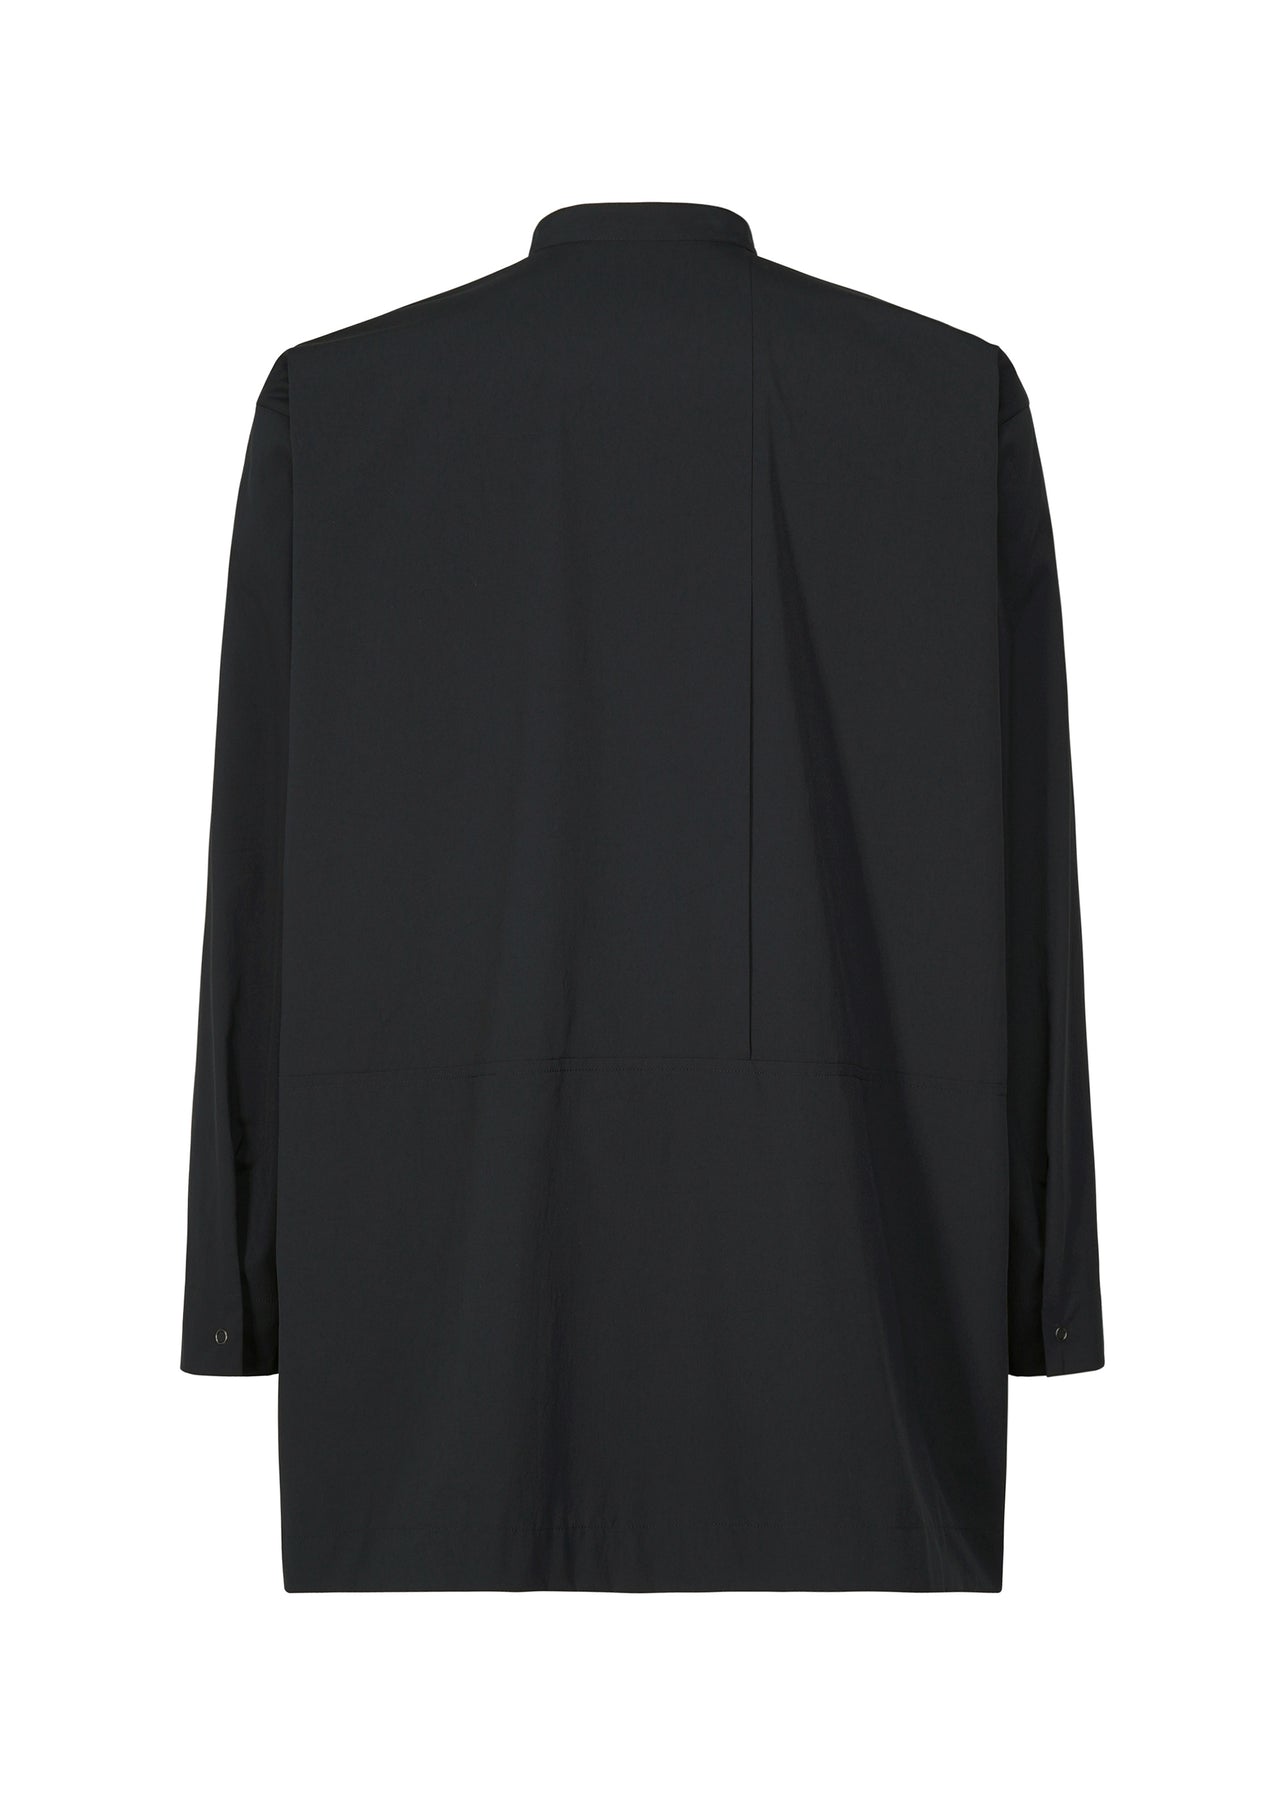 PACKABLE SHIRT | The official ISSEY MIYAKE ONLINE STORE | ISSEY